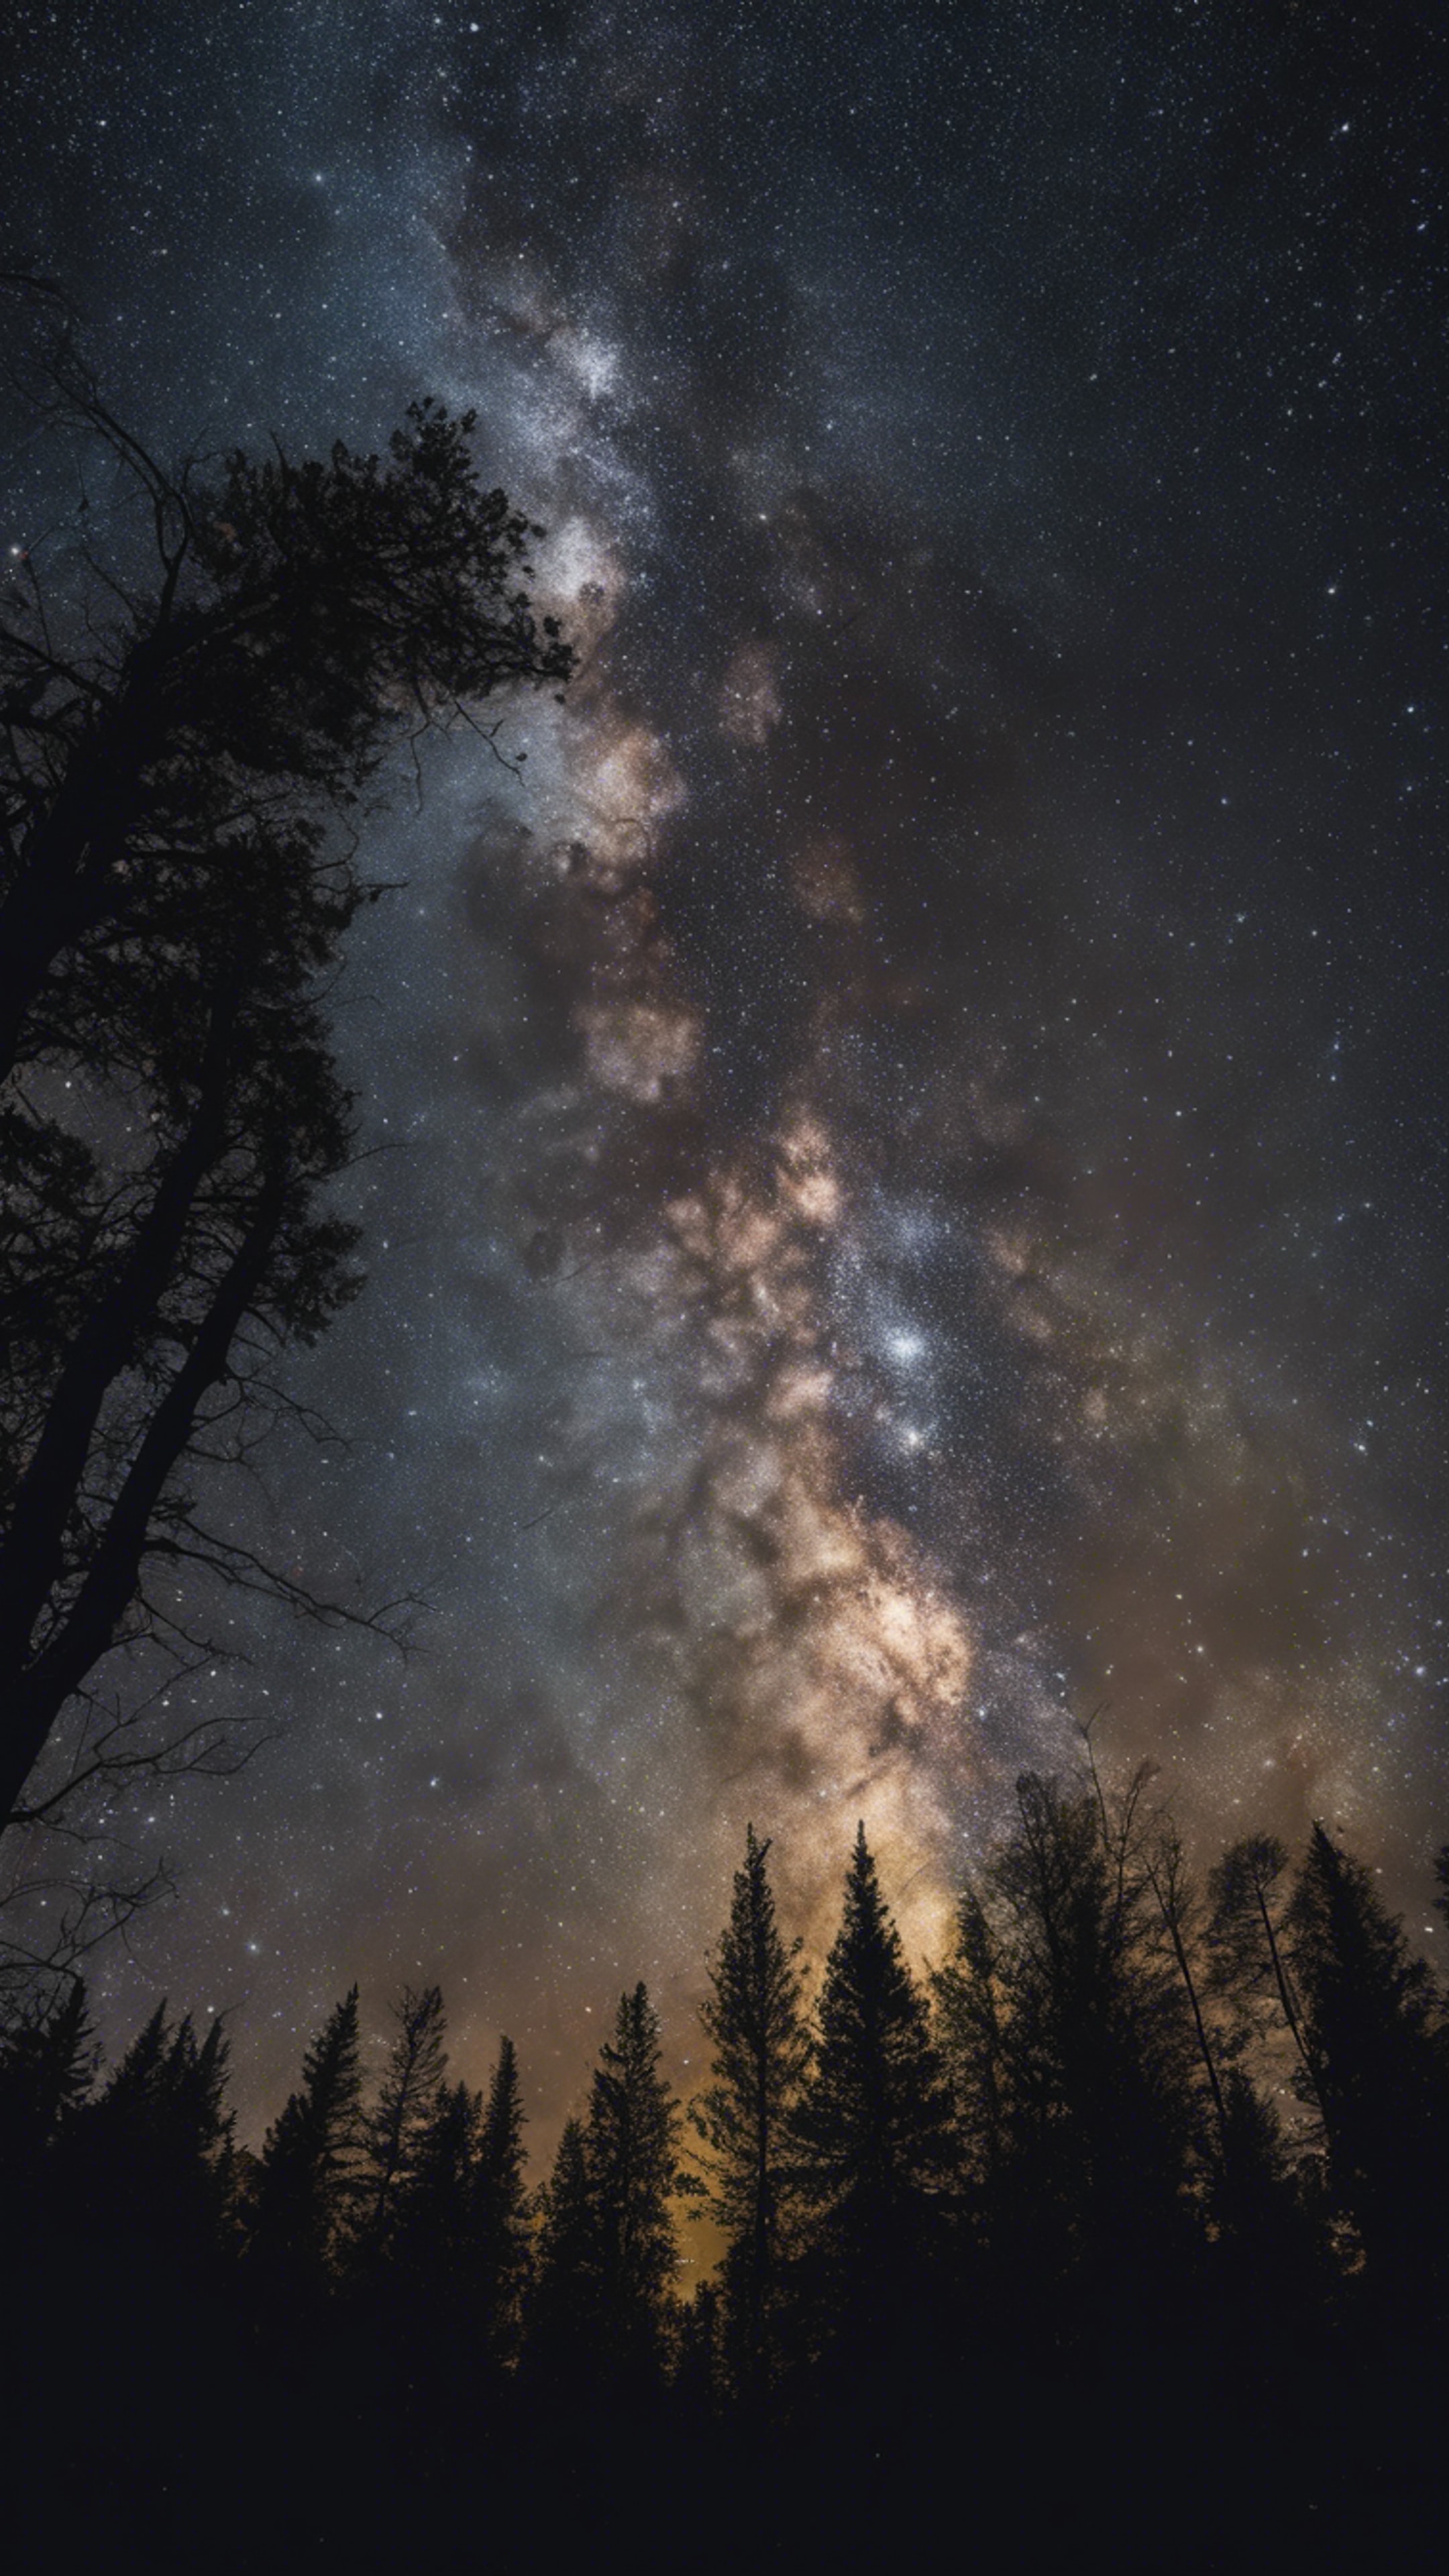 An astrophotograph showcasing the radiant Milky Way, against the contrast of a dark forest silhouette. Wallpaper[89bcc876a6704e52b700]